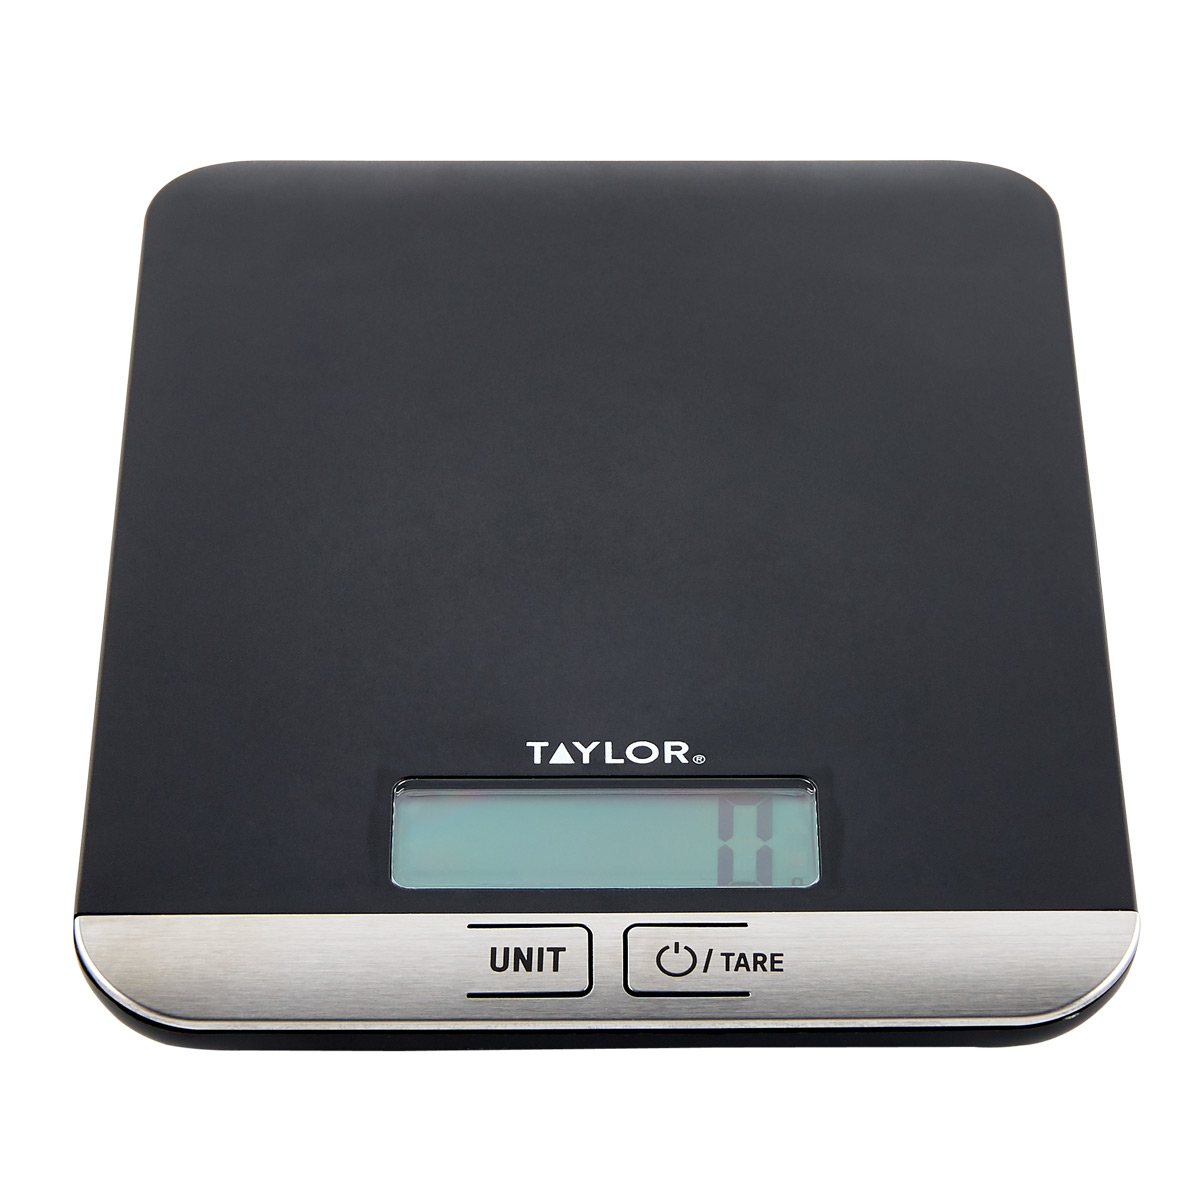 Taylor Digital Scale | The Container Store